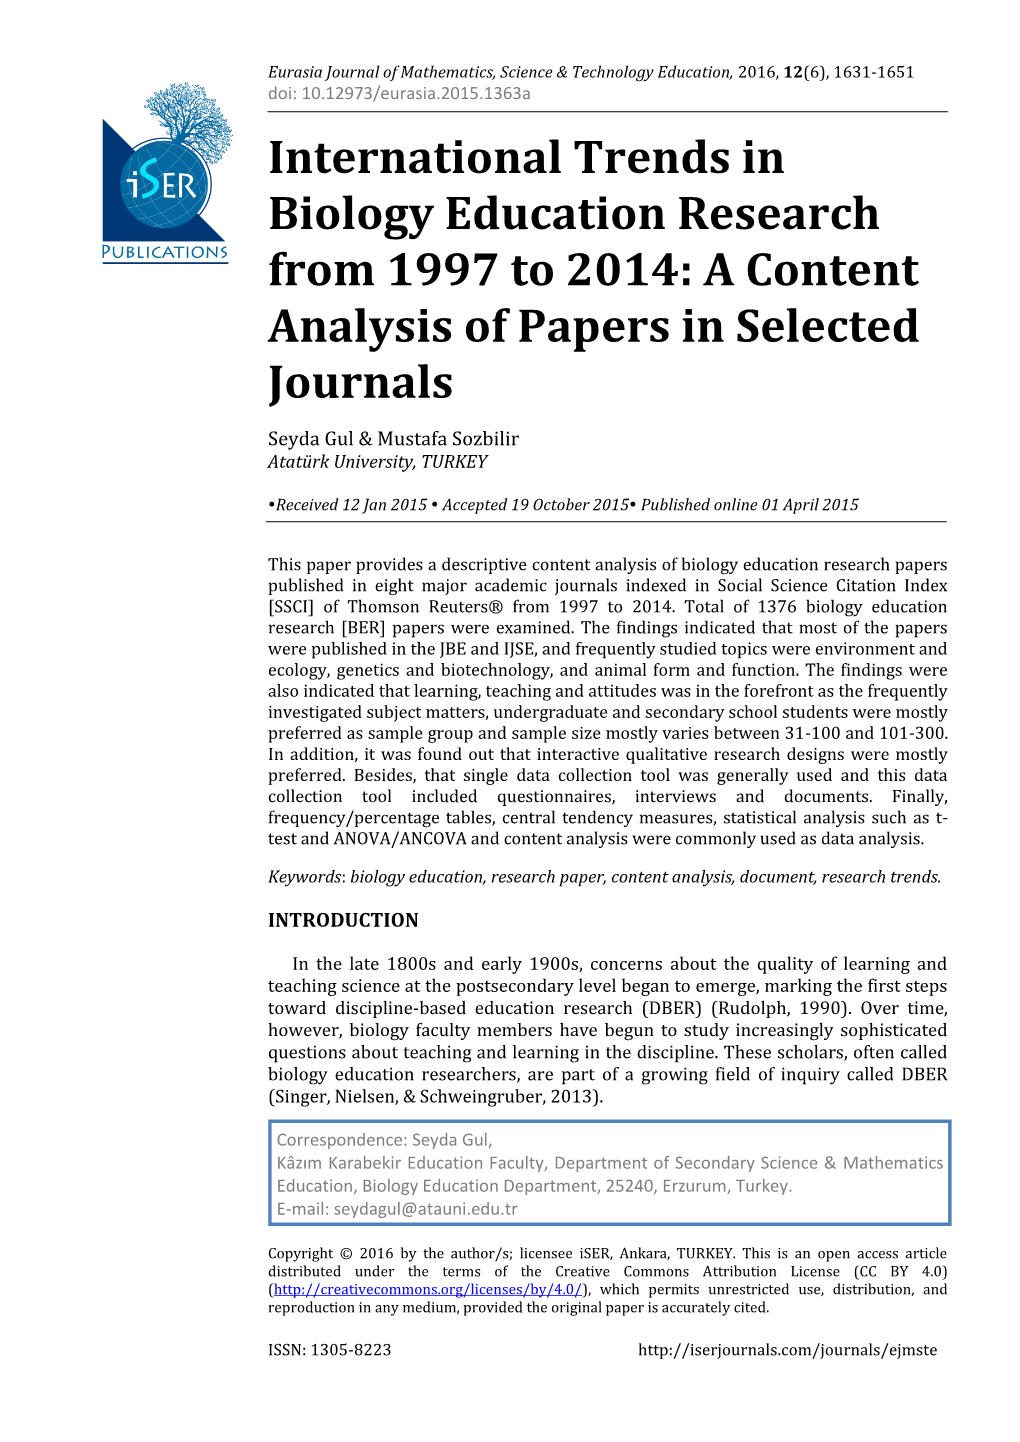 International Trends in Biology Education Research from 1997 to 2014: a Content Analysis of Papers in Selected Journals